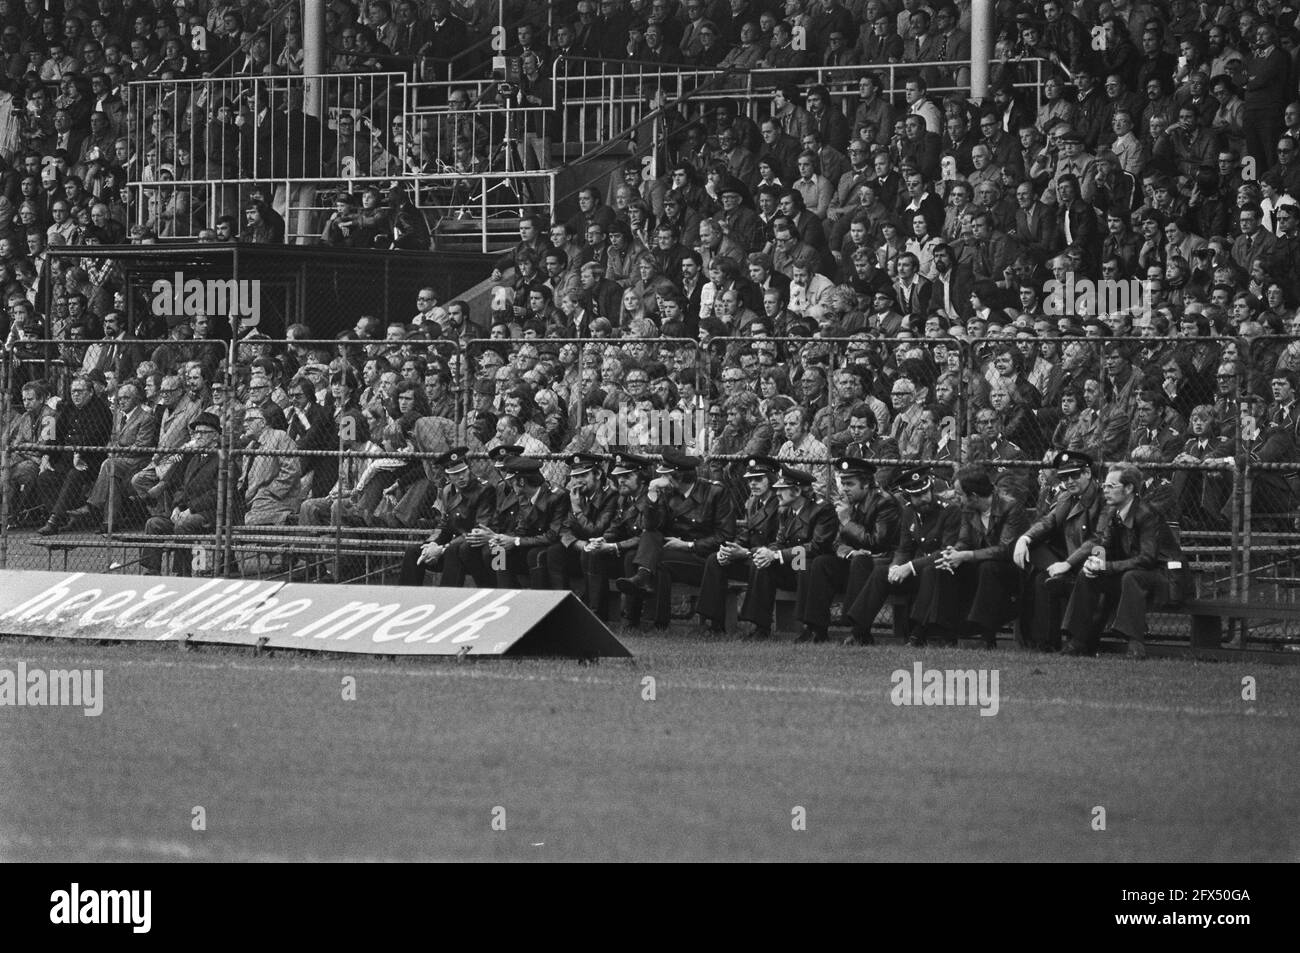 FC Utrecht against PSV 1-0; extra police in Utrecht stadium, September 26, 1976, POLICE, sports, stadiums, soccer, The Netherlands, 20th century press agency photo, news to remember, documentary, historic photography 1945-1990, visual stories, human history of the Twentieth Century, capturing moments in time Stock Photo